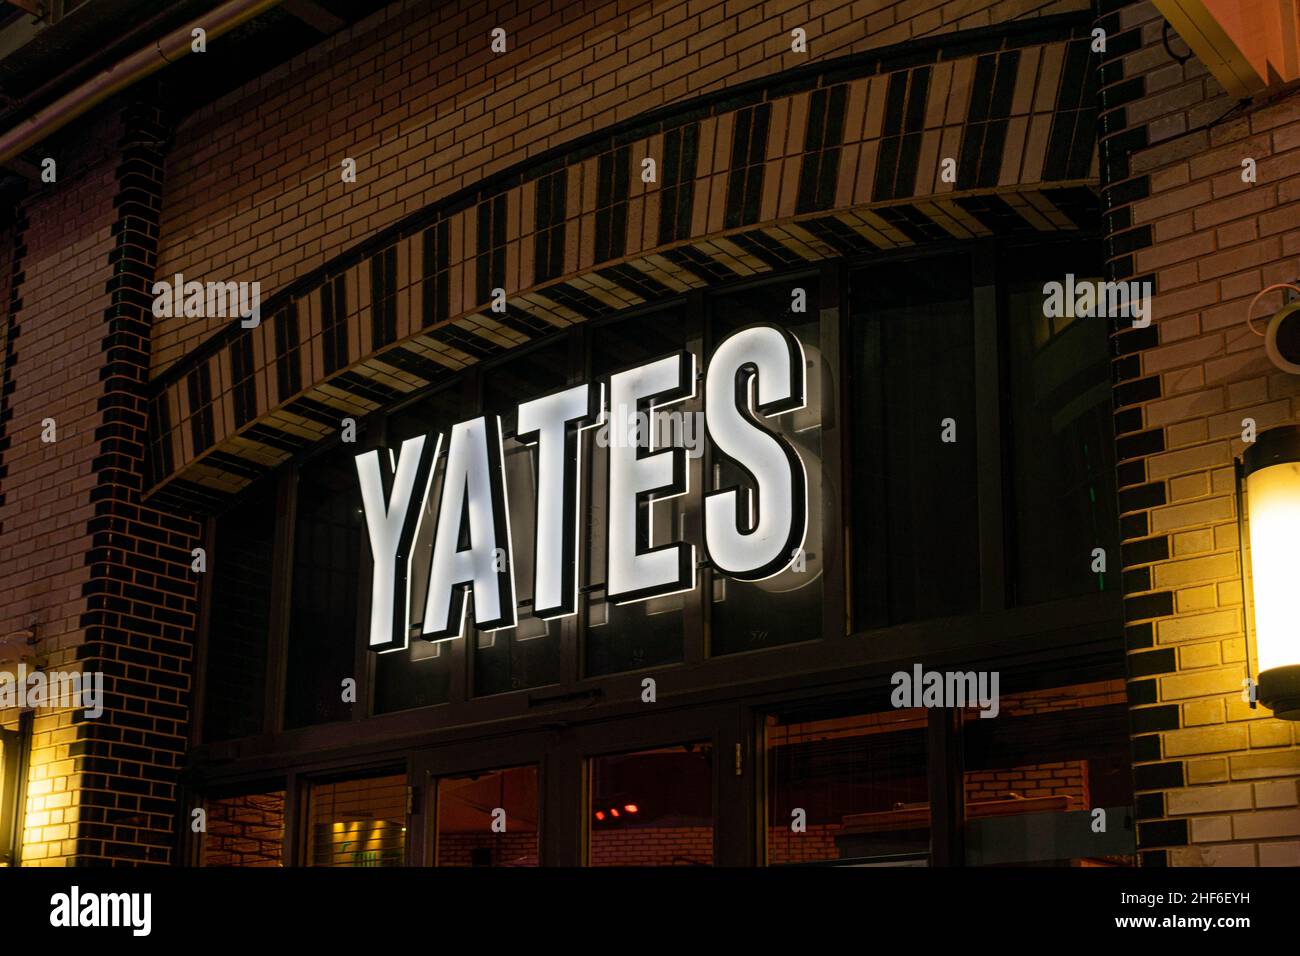 Manchester, UK - 22nd September 2019:Yates vibrant neon sign at the entrance to the Yates pub, cocktail bar and restaurant at The Printworks in the ci Stock Photo